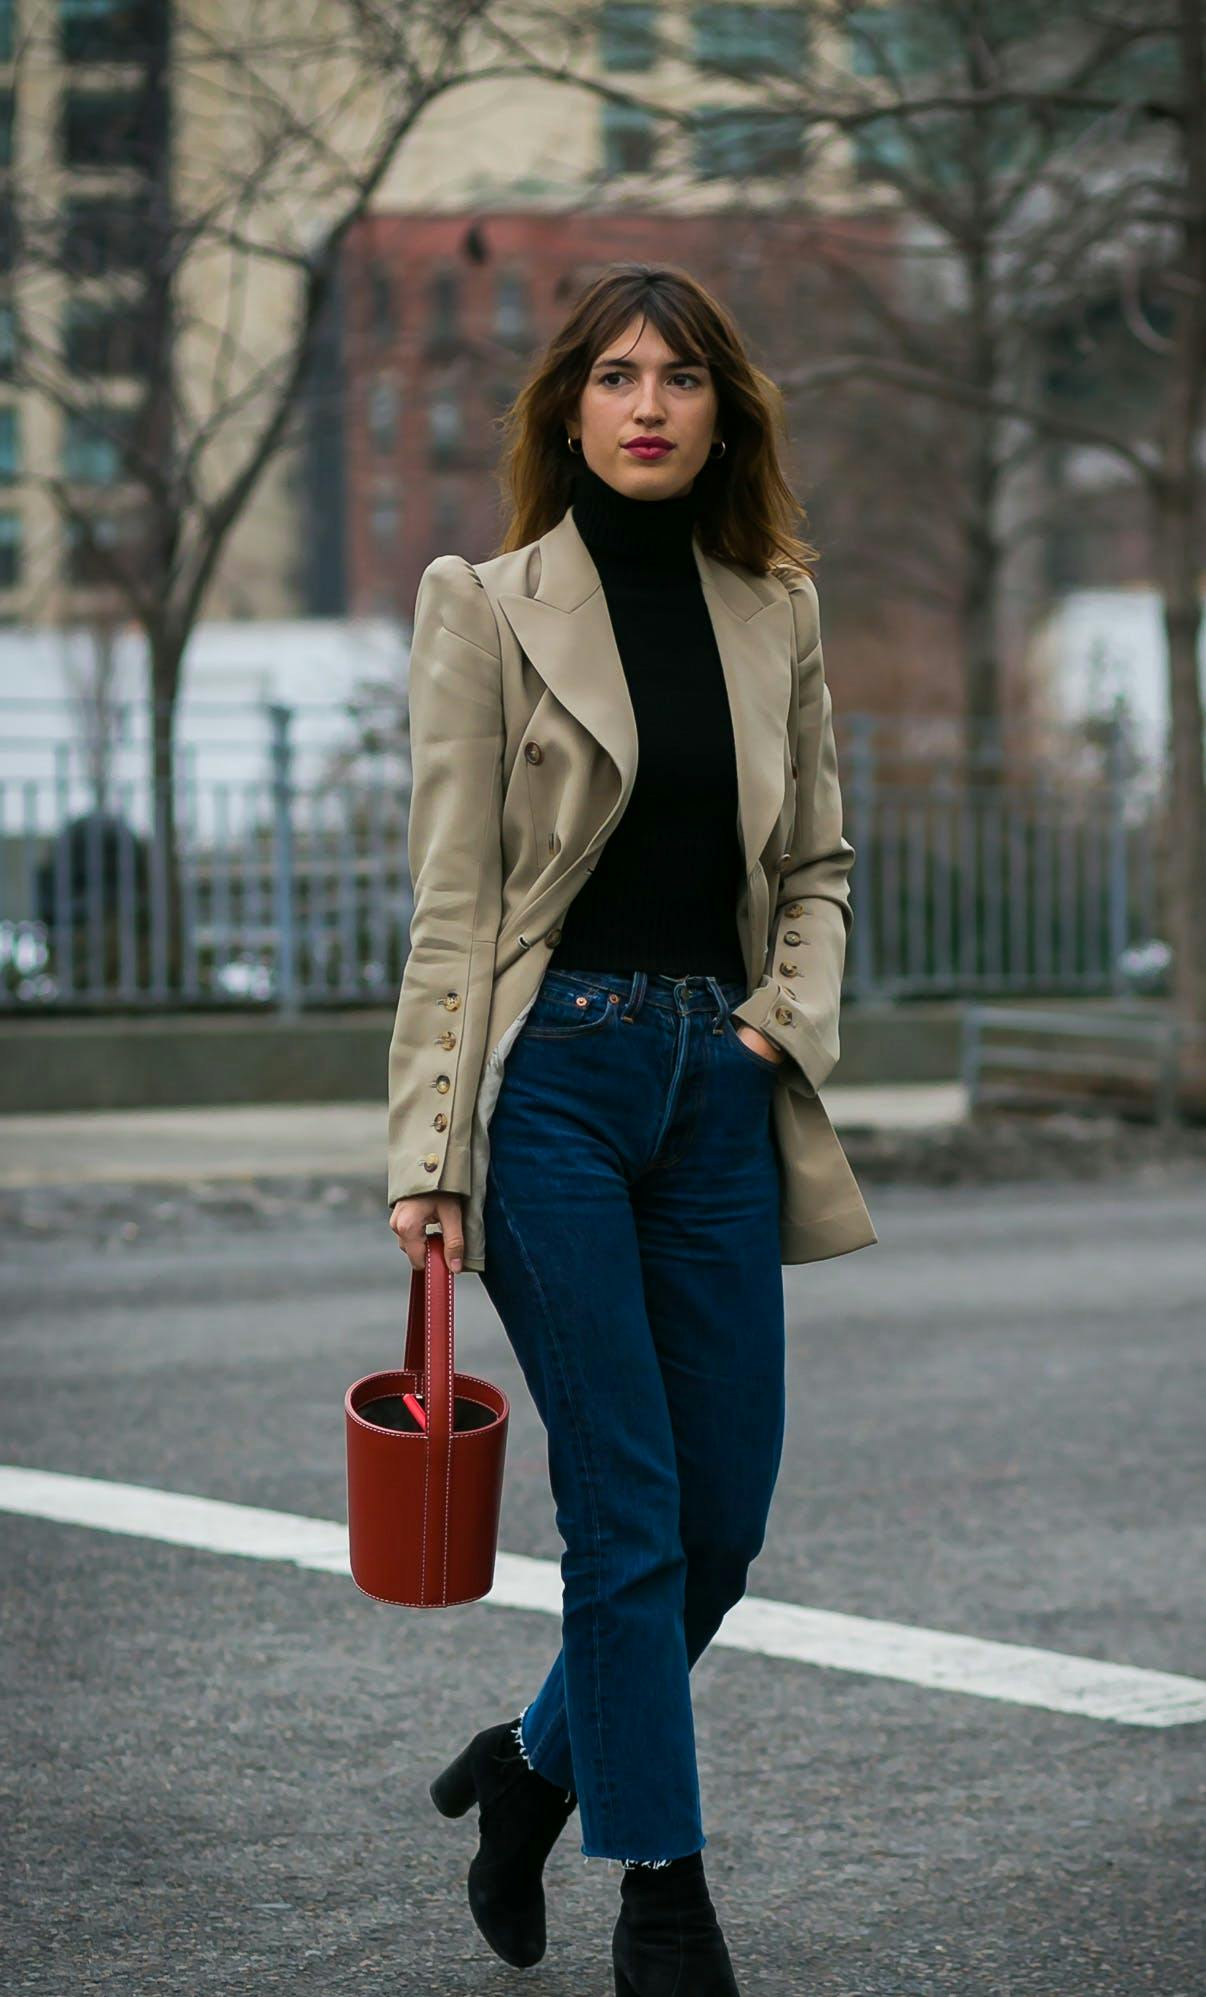 Jeanne Damas in a light brown blazer, black top, and blue jeans French girl style icons.